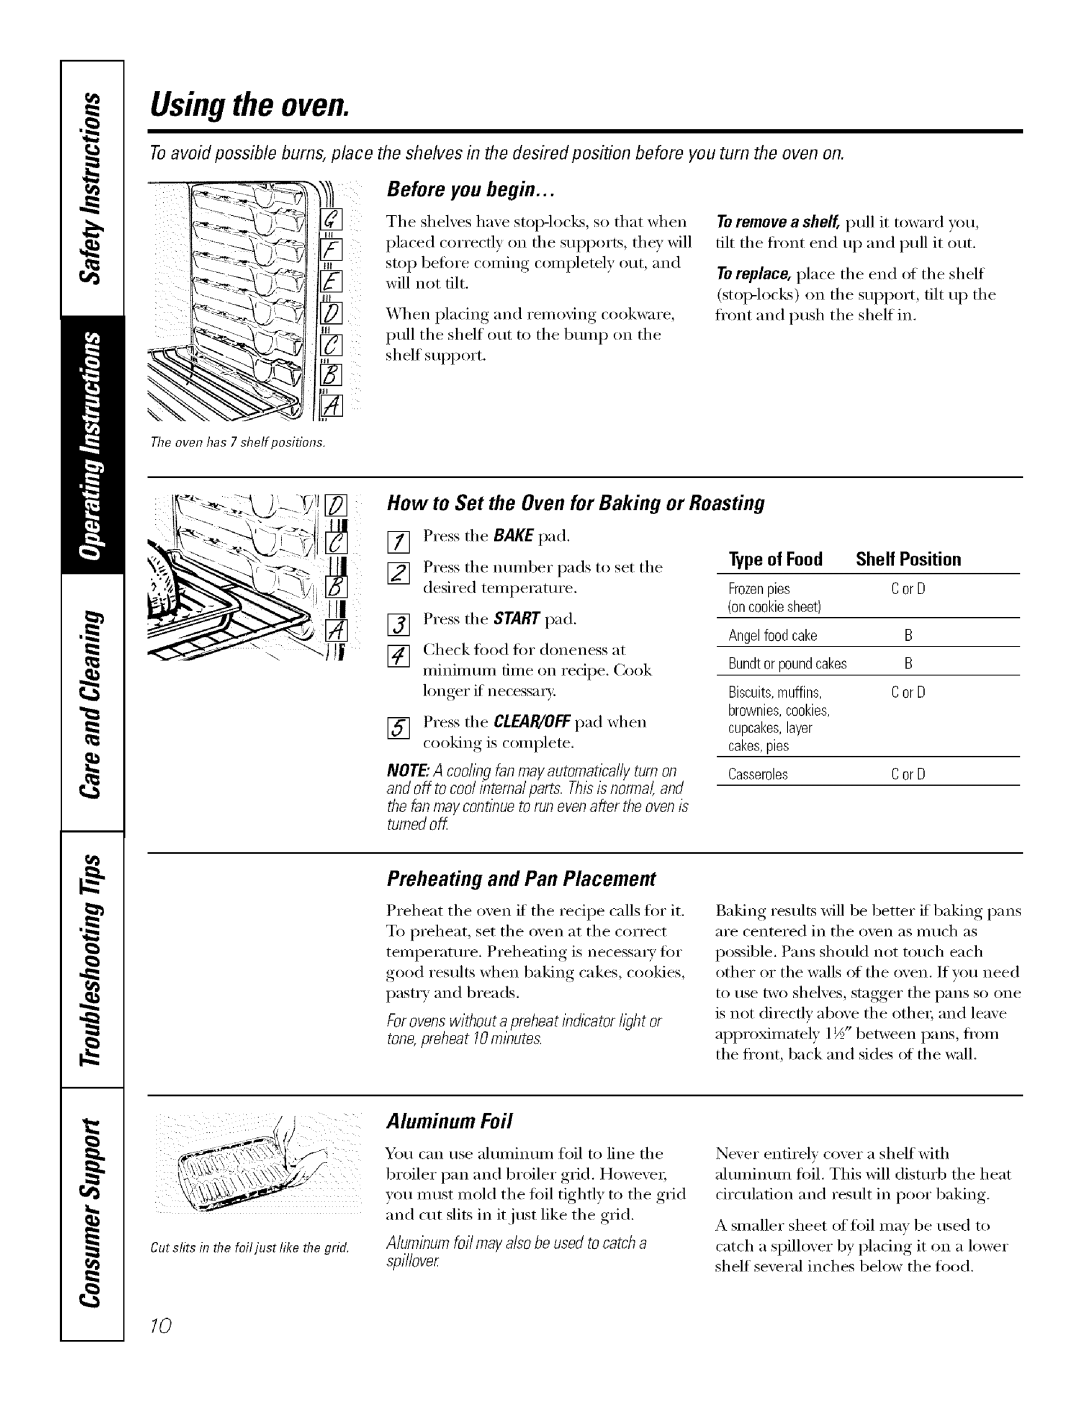 GE J7912-30 manual Usingthe oven, b %c 2iID, Before you begin, How to Set the Oven for Baking or Roasting, Aluminum Foil 